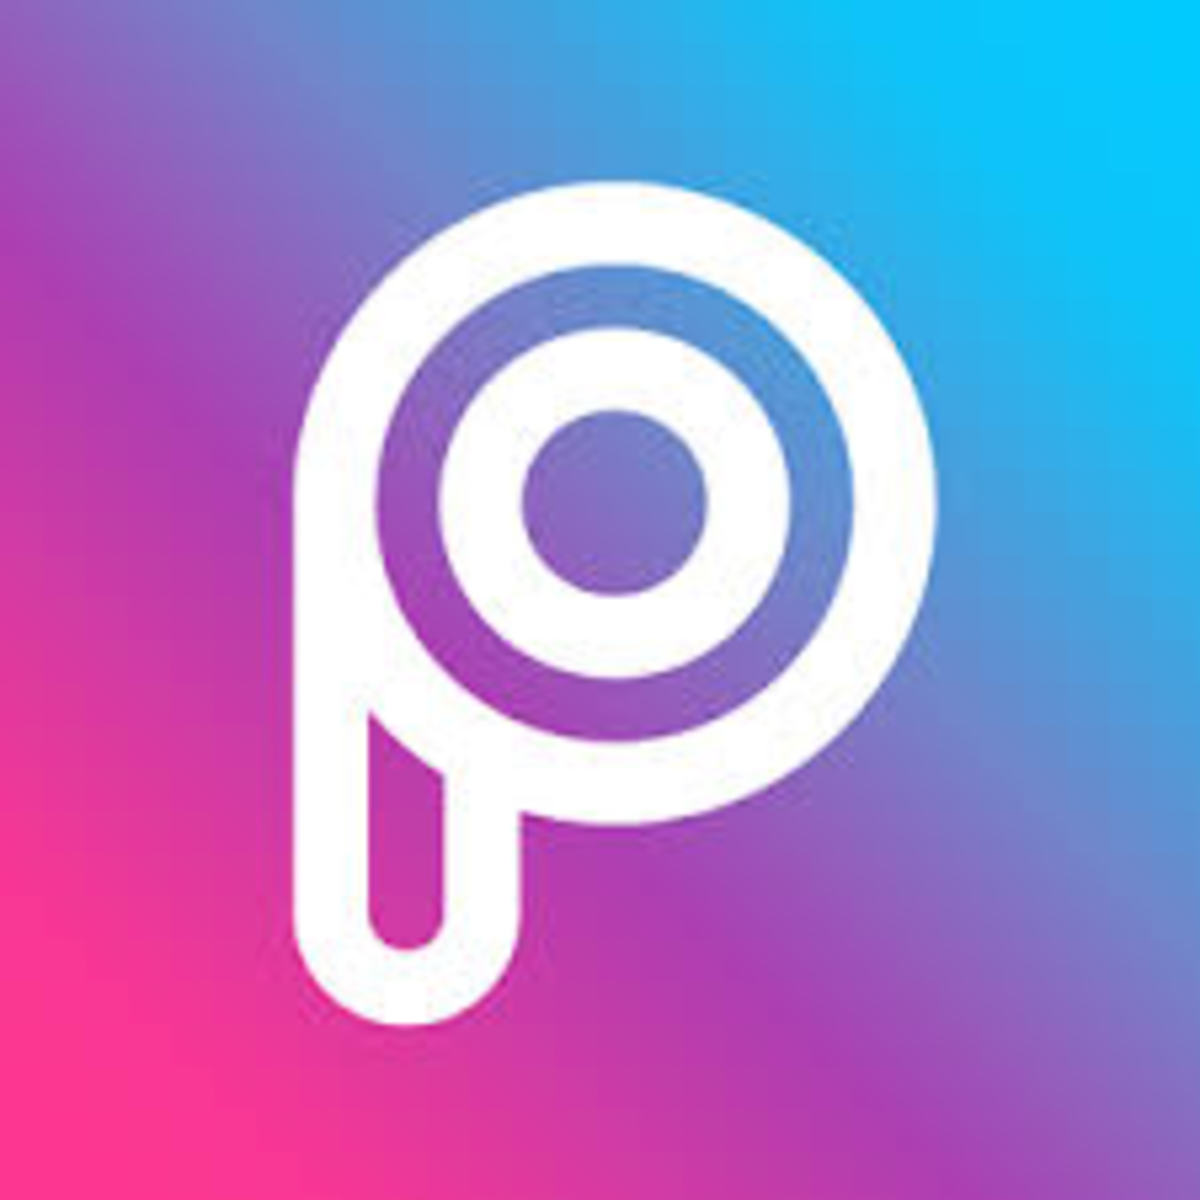 Picsart is #1 grossing app in photography